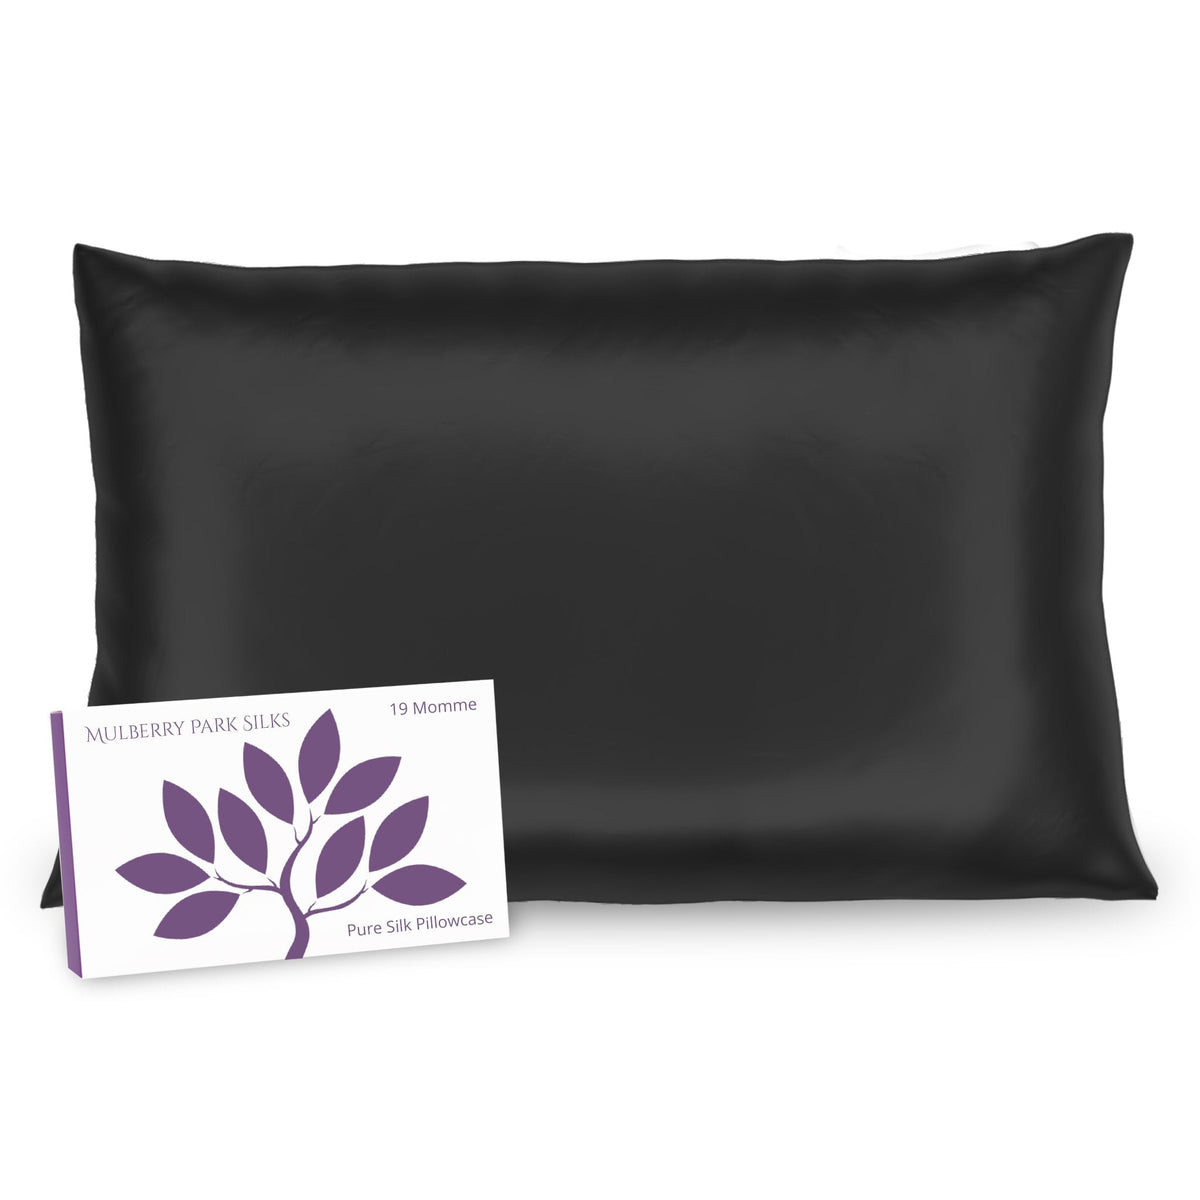 Mulberry Park Silks 19 Momme Pillowcase Black with box packaging